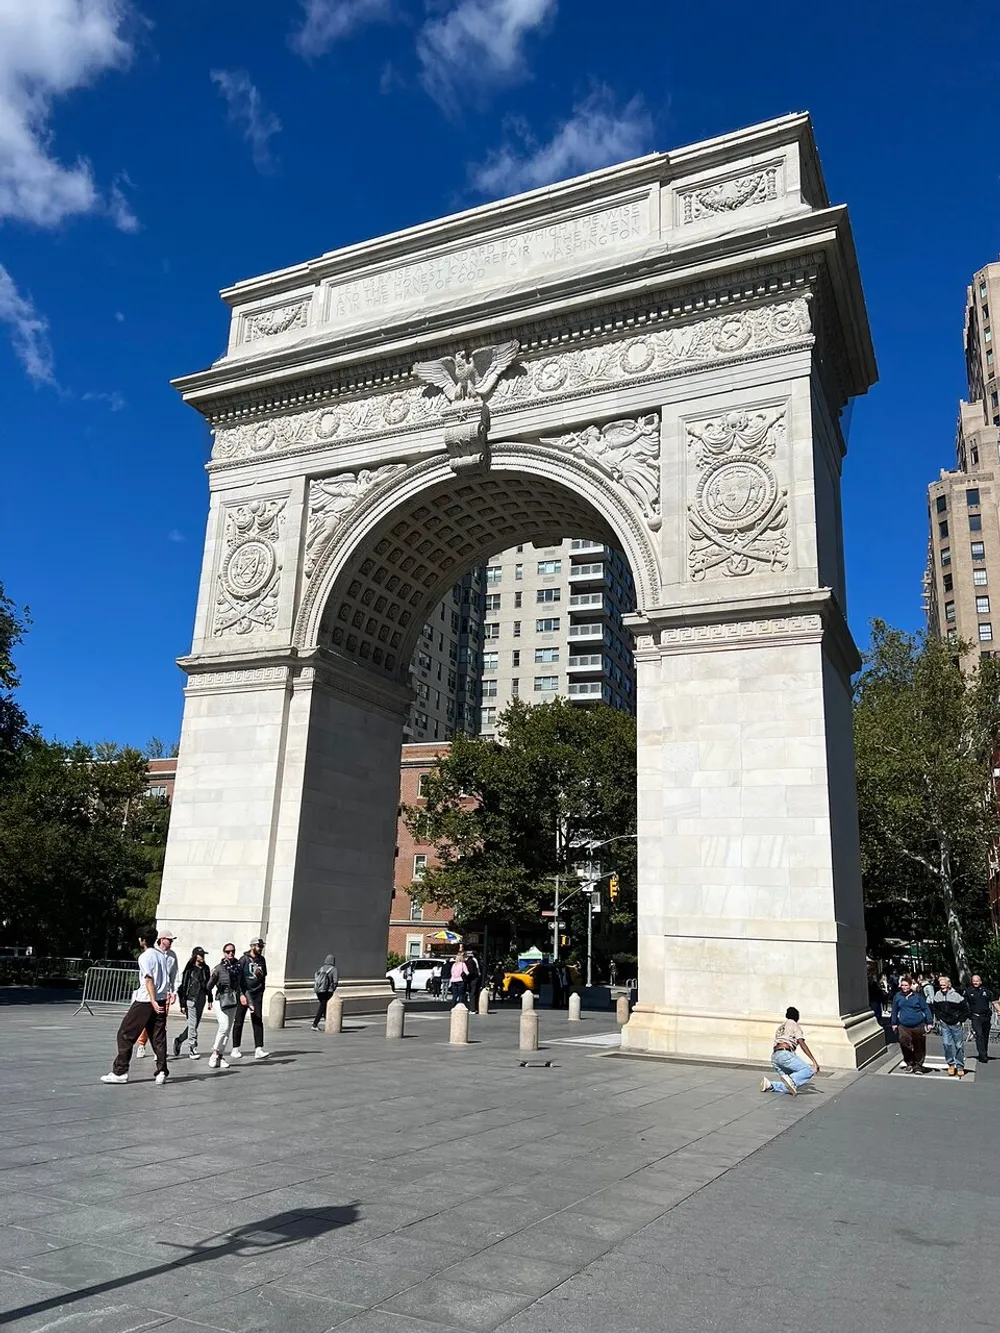 The image shows the Washington Square Arch in New York City on a sunny day with people walking around the open plaza